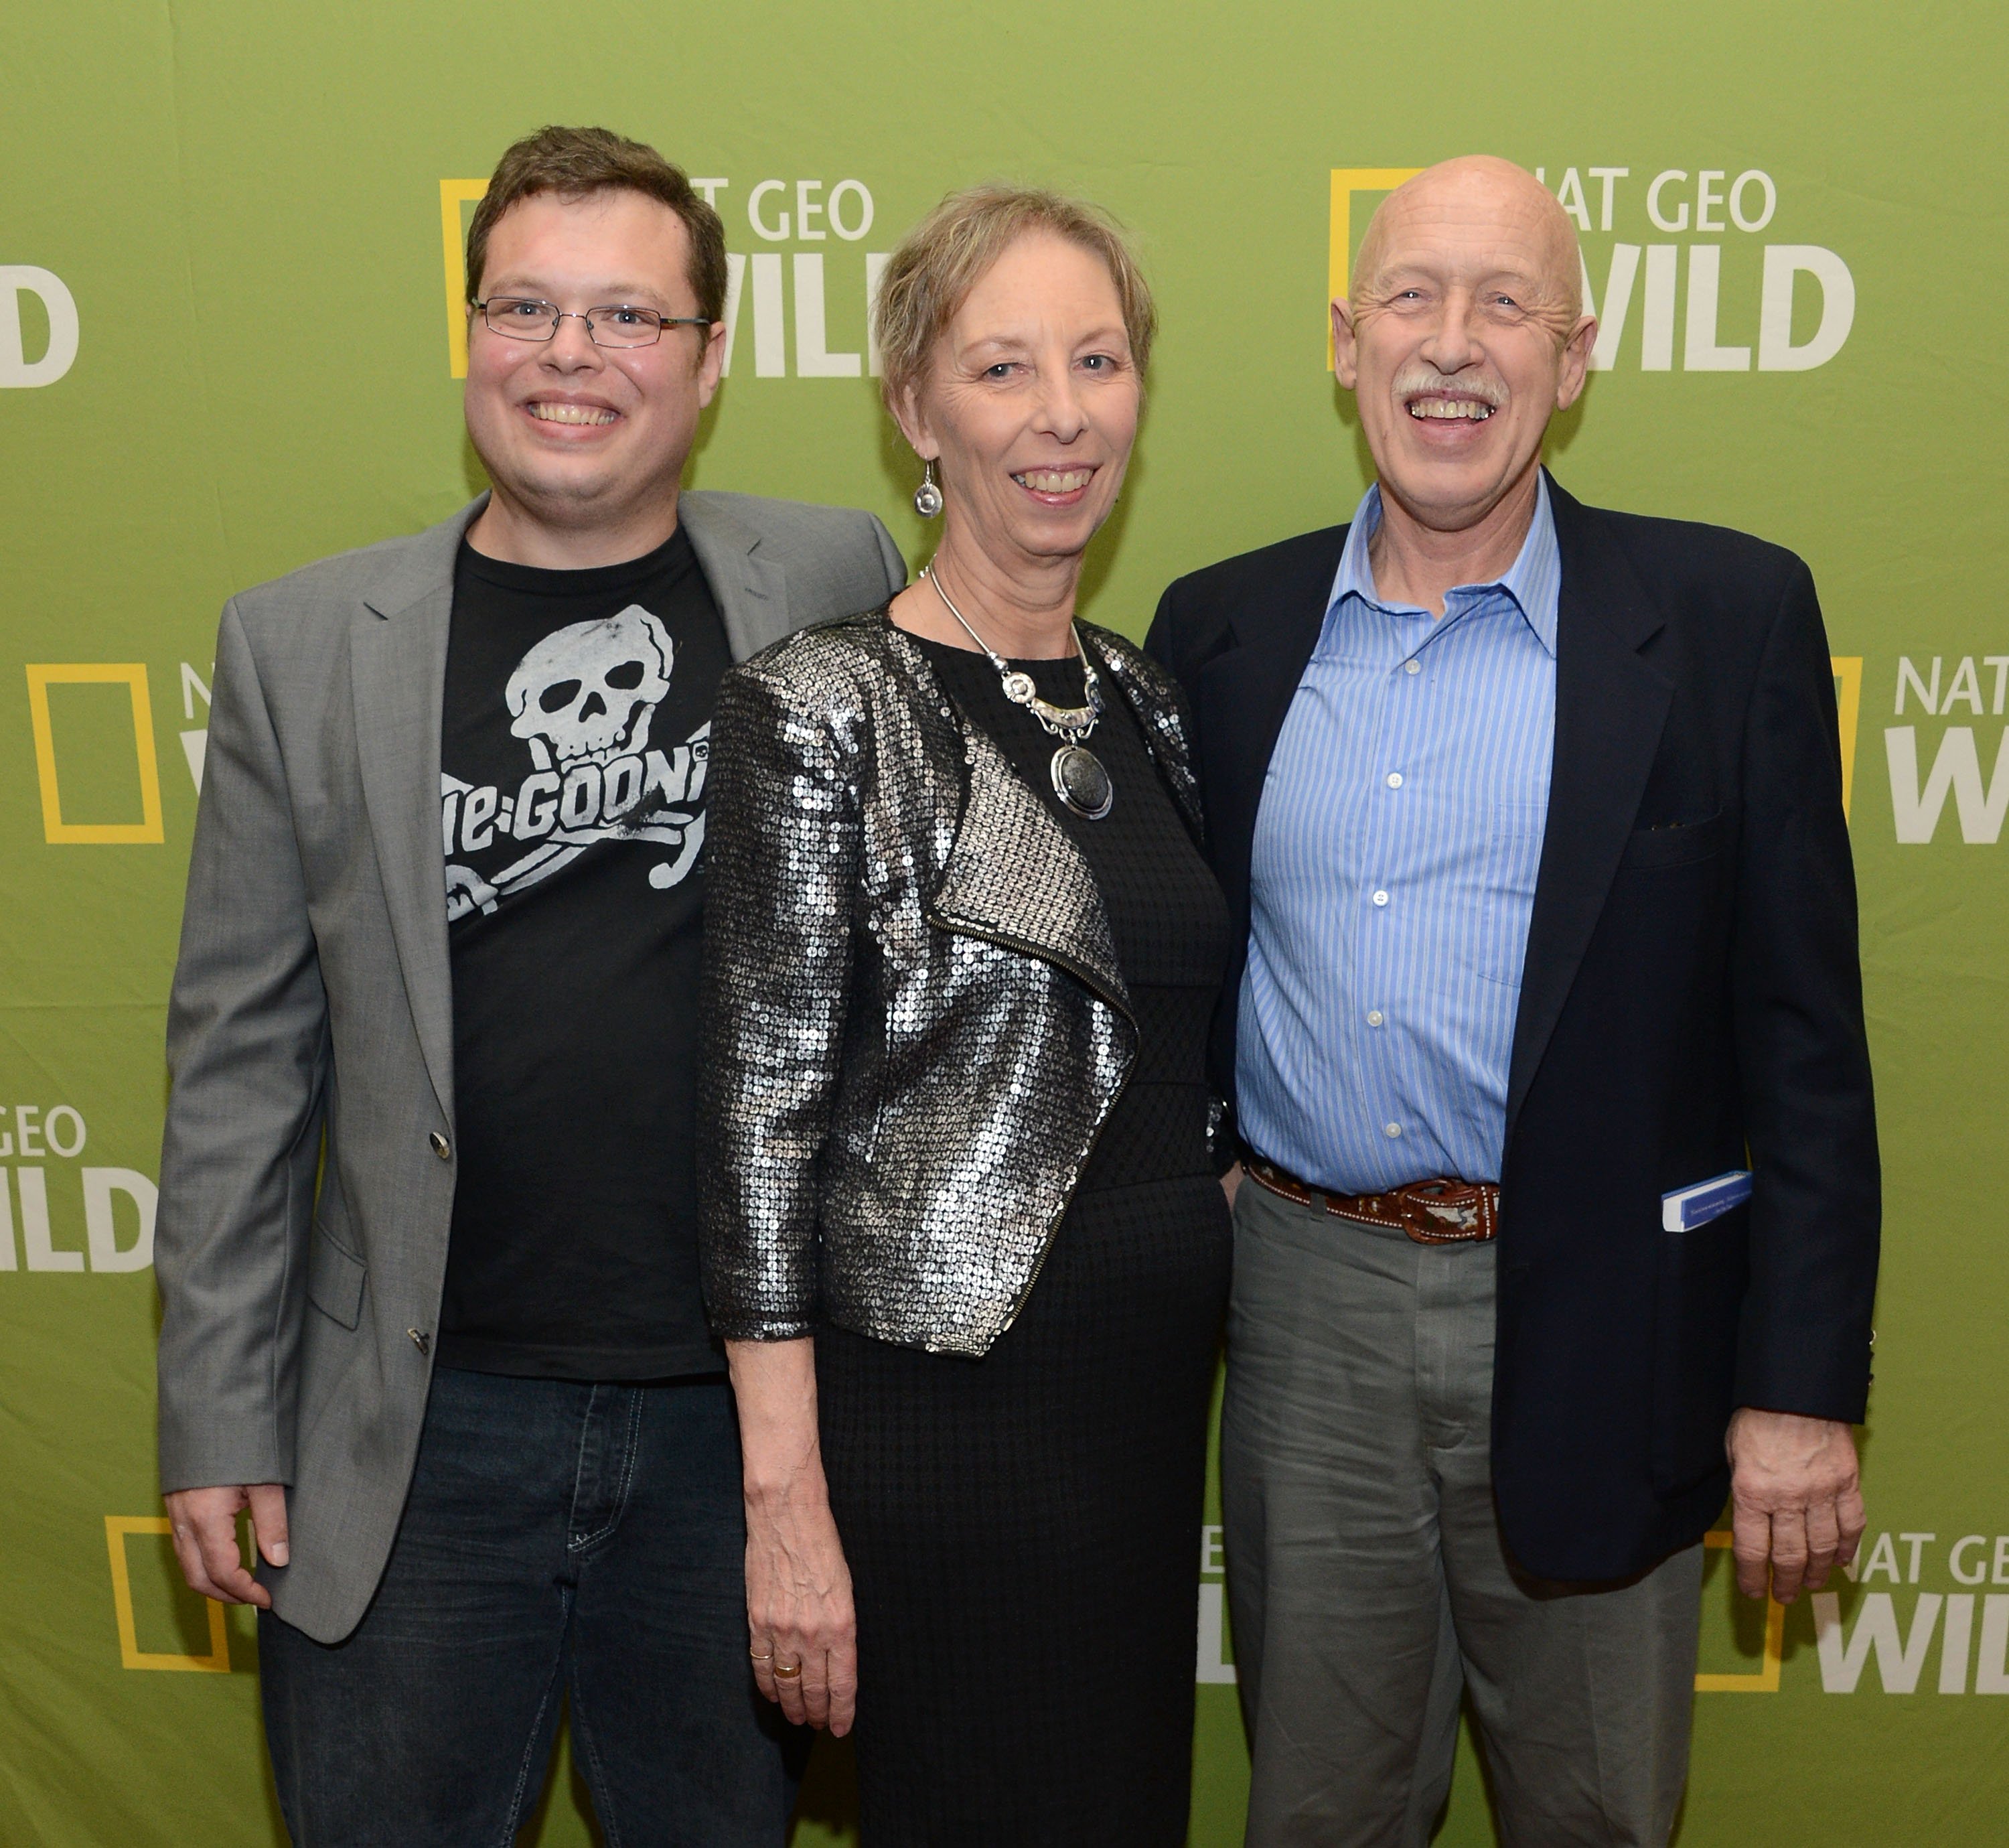 'The Incredible Dr. Pol' stars, left to right, Charles Pol, Diane Pol, and Dr. Jan Pol pose for a photo